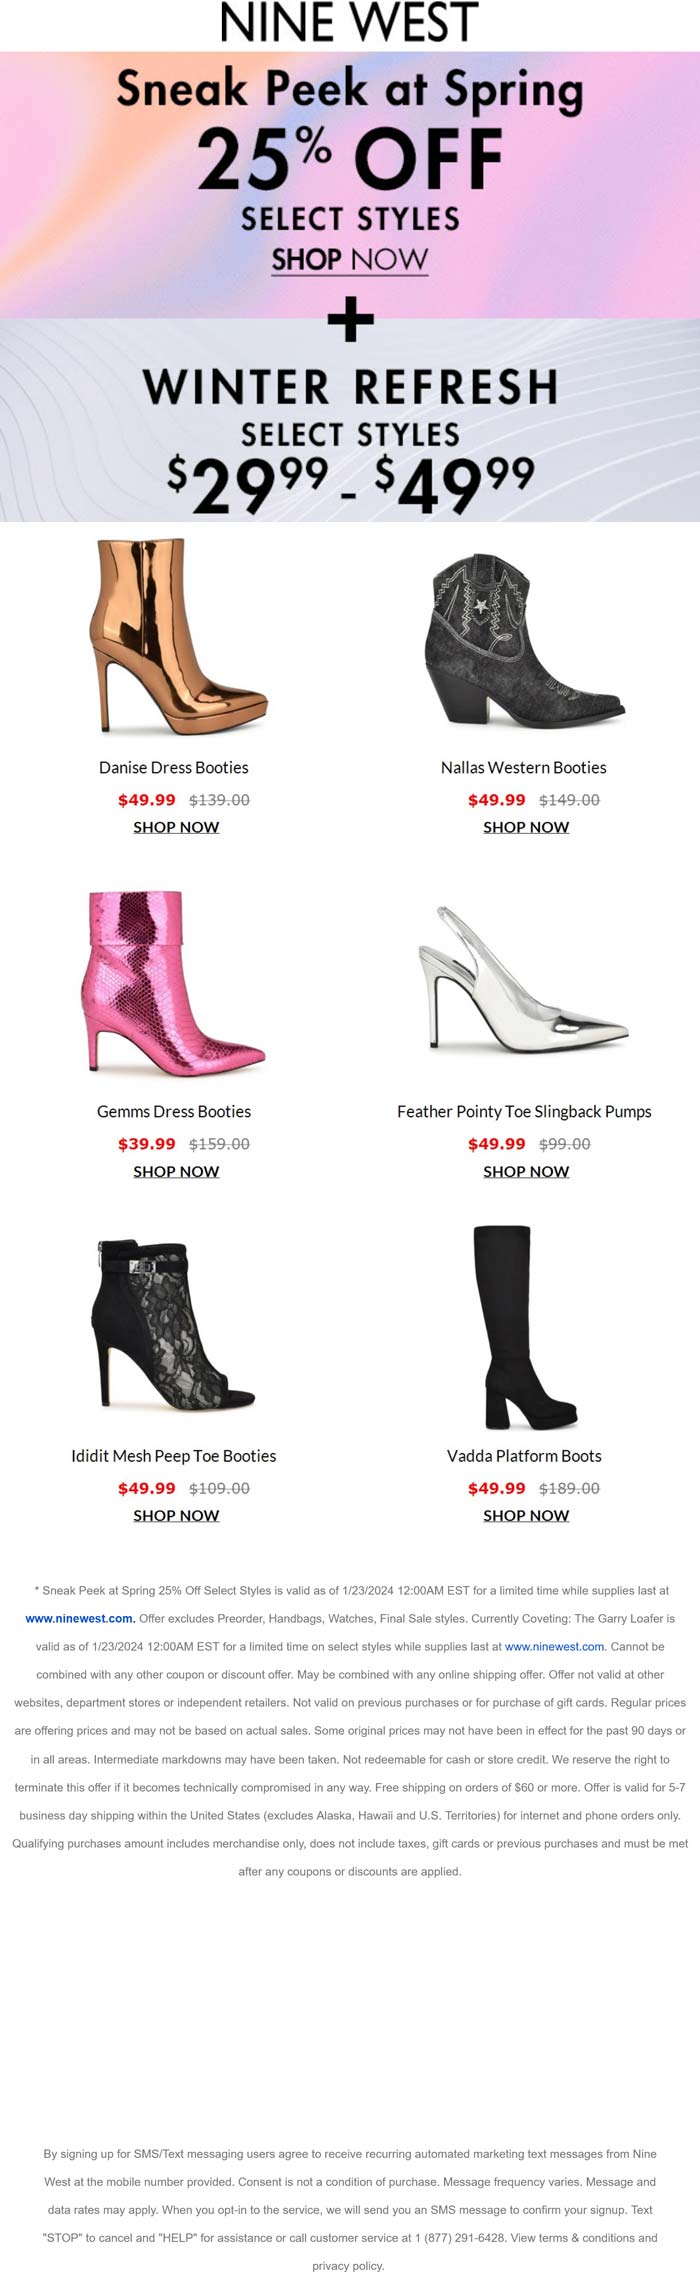 25% off spring styles at Nine West #ninewest